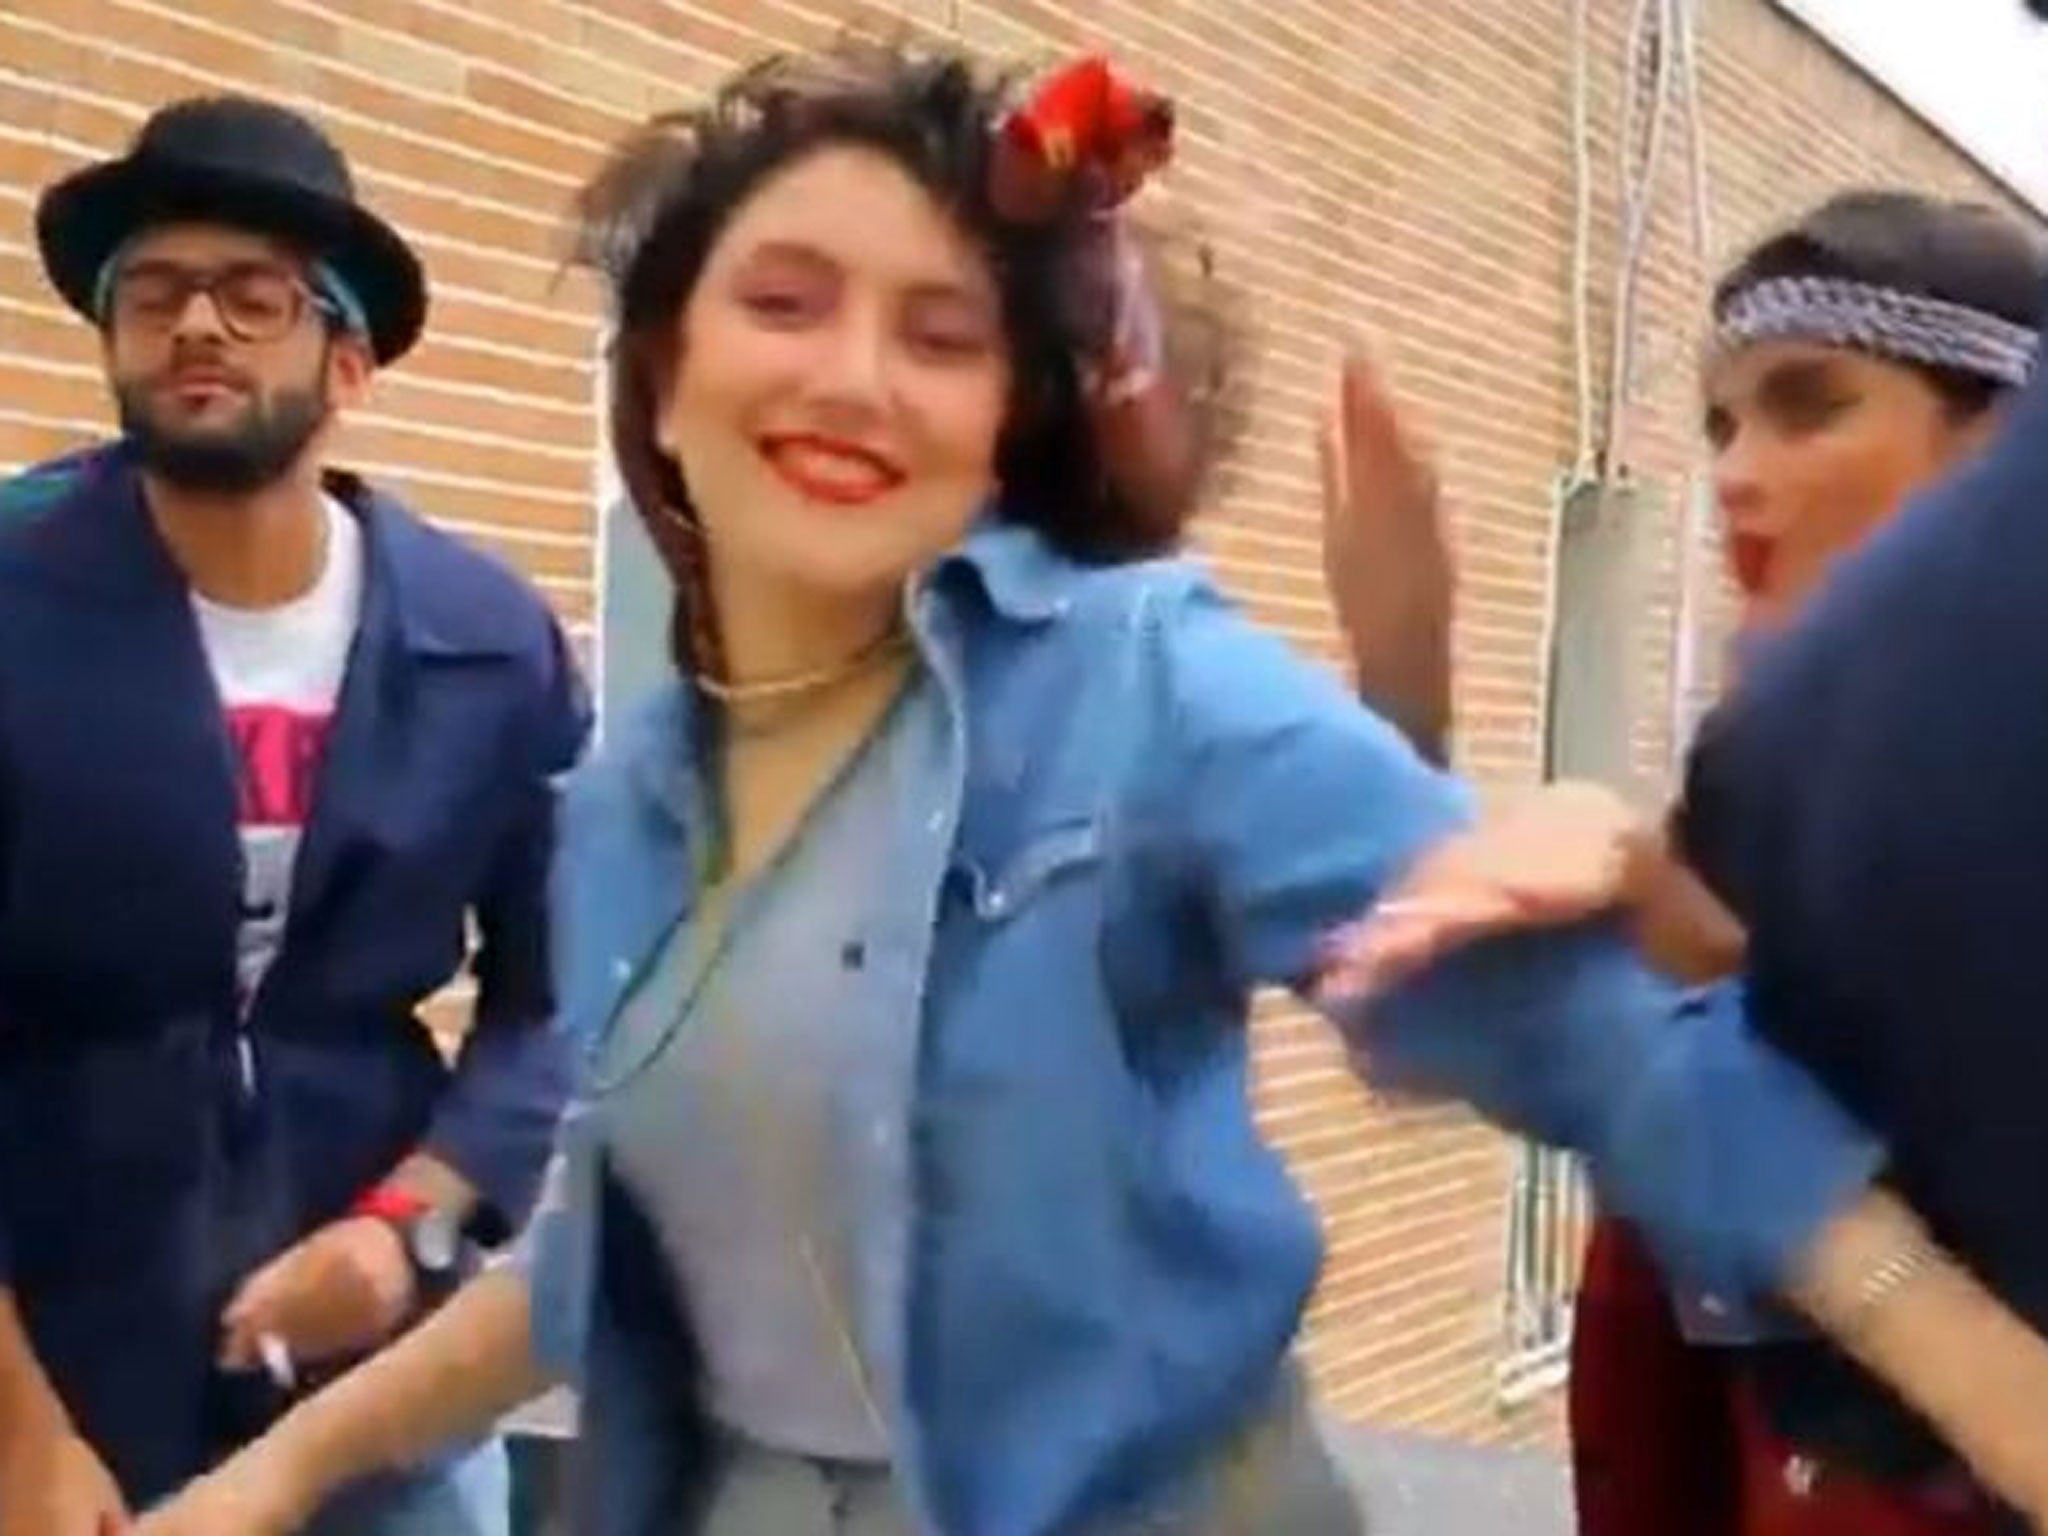 In this frame grab taken from video posted to YouTube, people dance to Pharrell Williams' hit song "Happy" on a rooftop in Tehran, Iran.